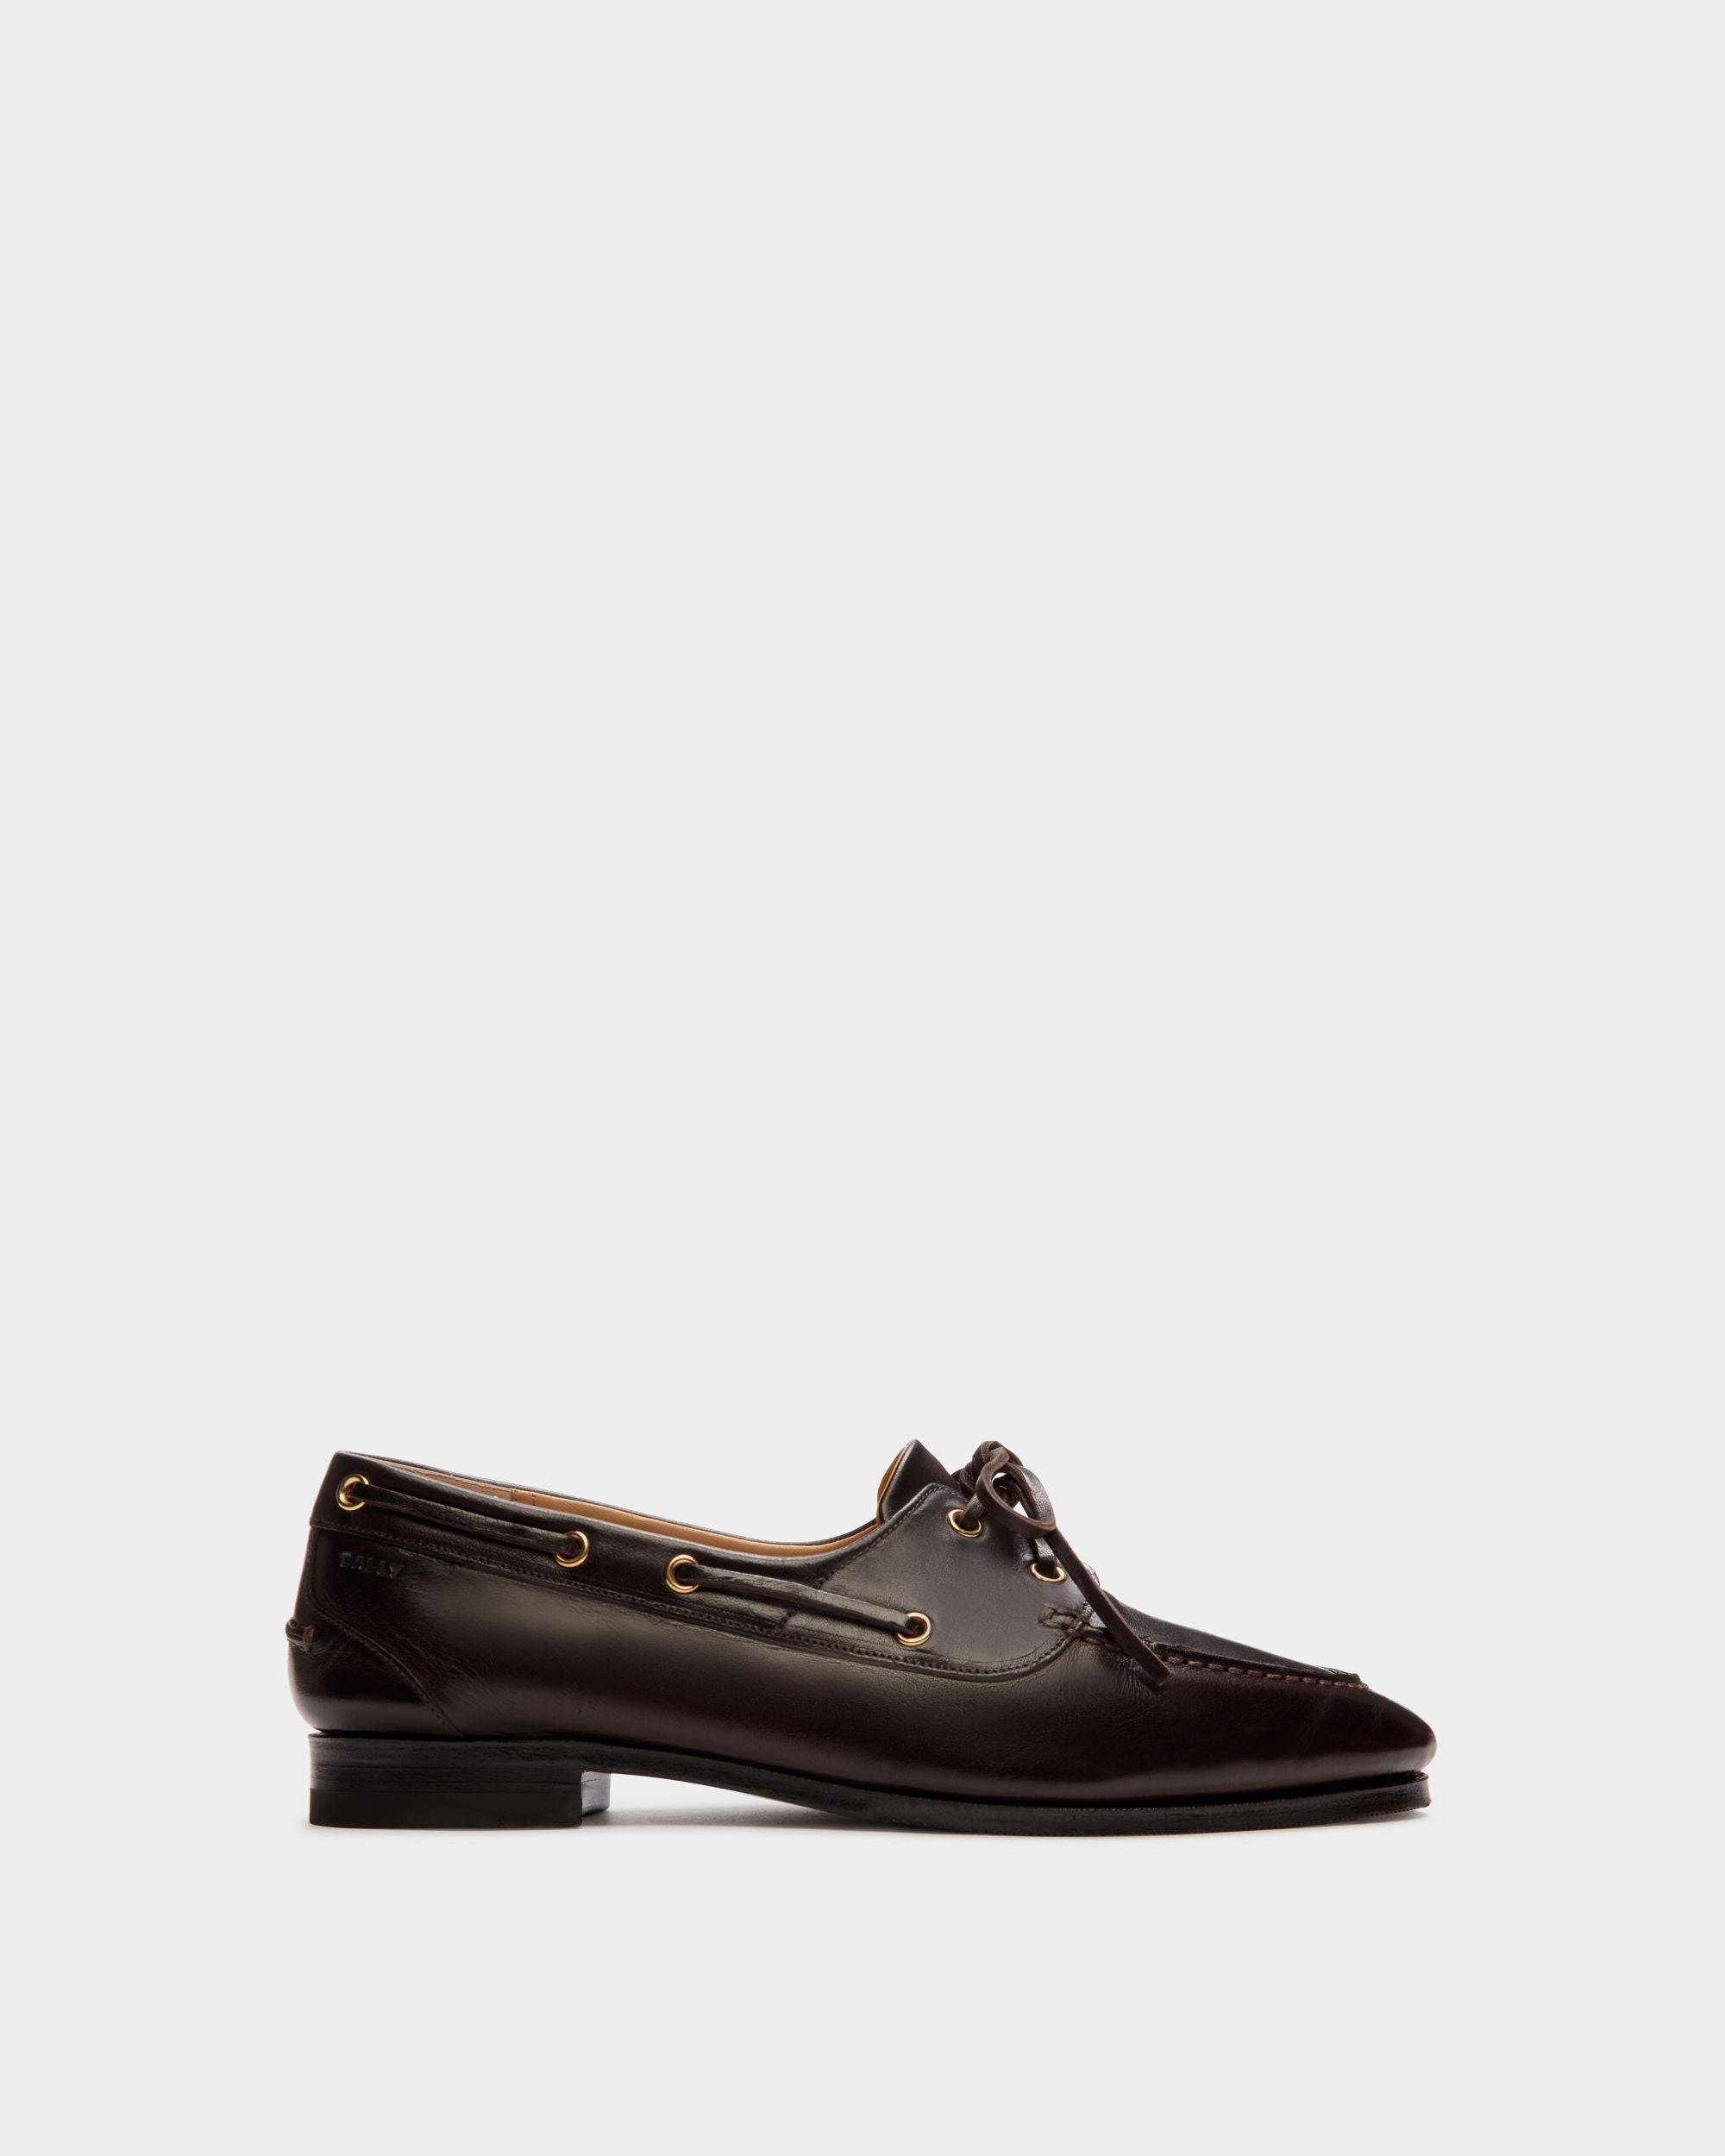 Women's Plume Moccasin in Dark Brown Leather | Bally | Still Life Side